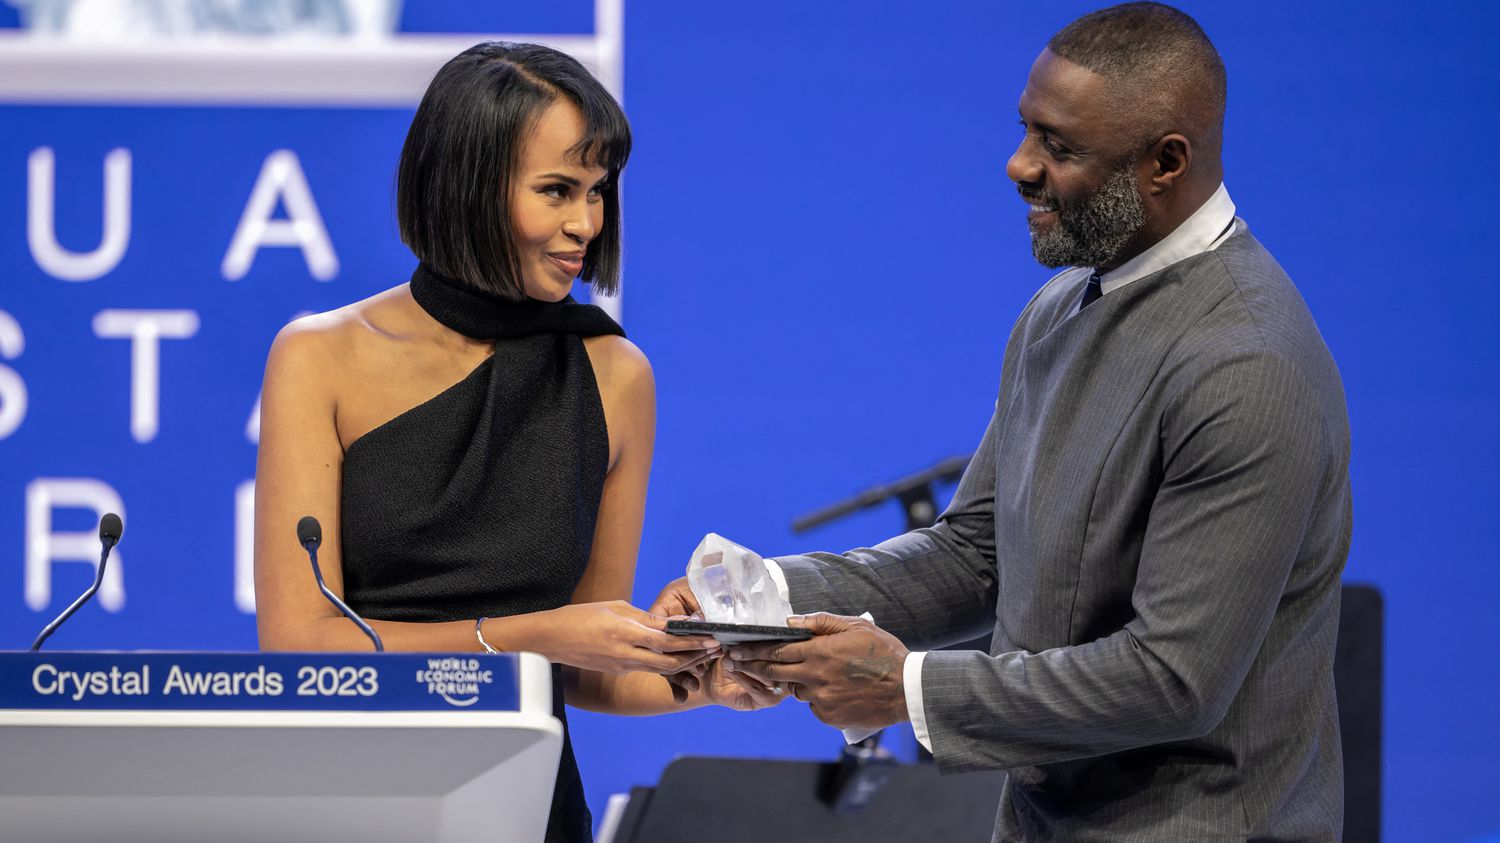 British actor Idris Elba brings the voice of African small farmers to the World Economic Forum in Davos
